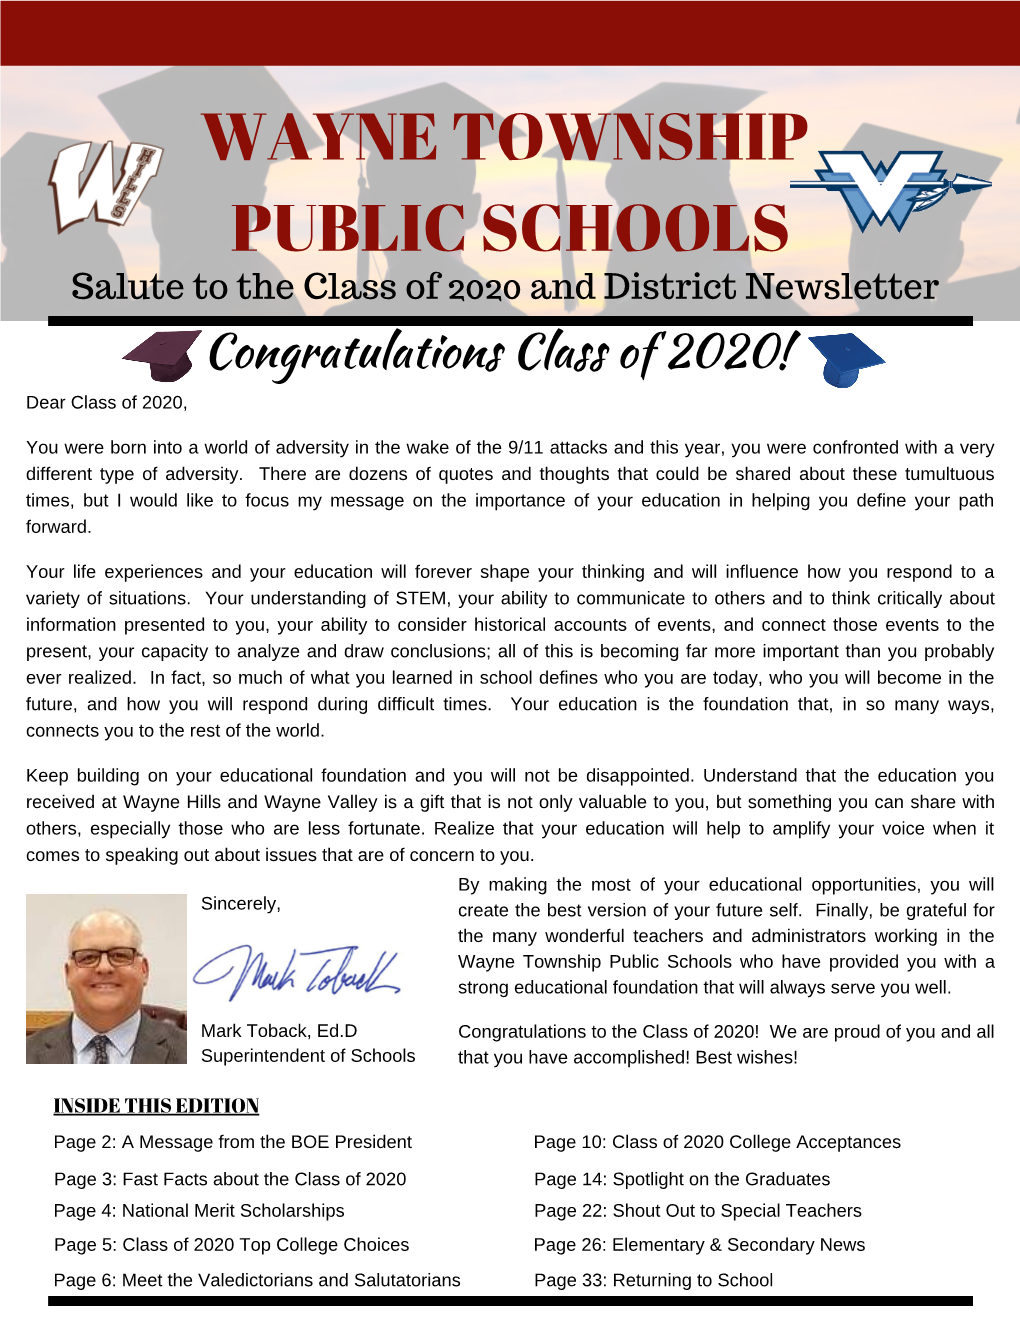 Wayne Township Public Schools End of the Year Newsletter 2020.Pdf